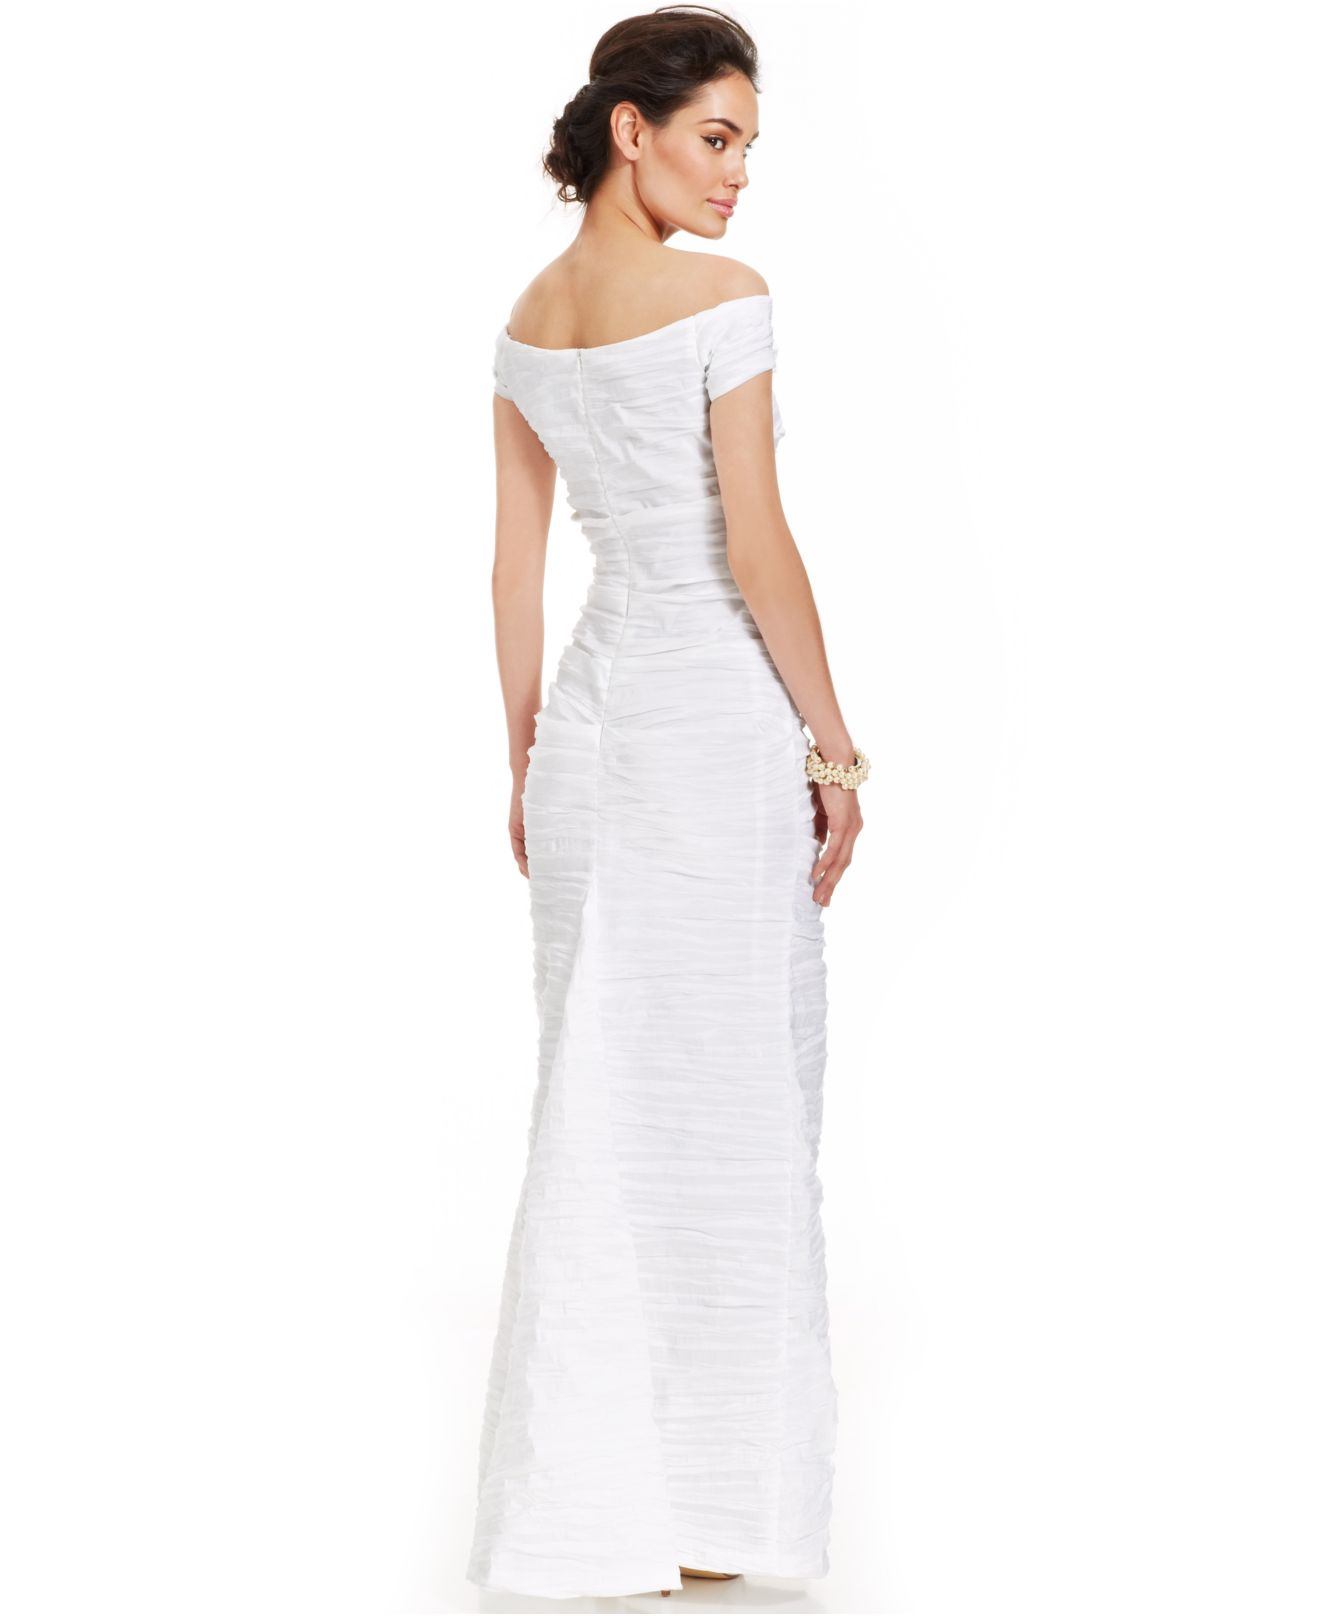 Lyst - Alex Evenings Off-the-shoulder Taffeta Evening Gown in White